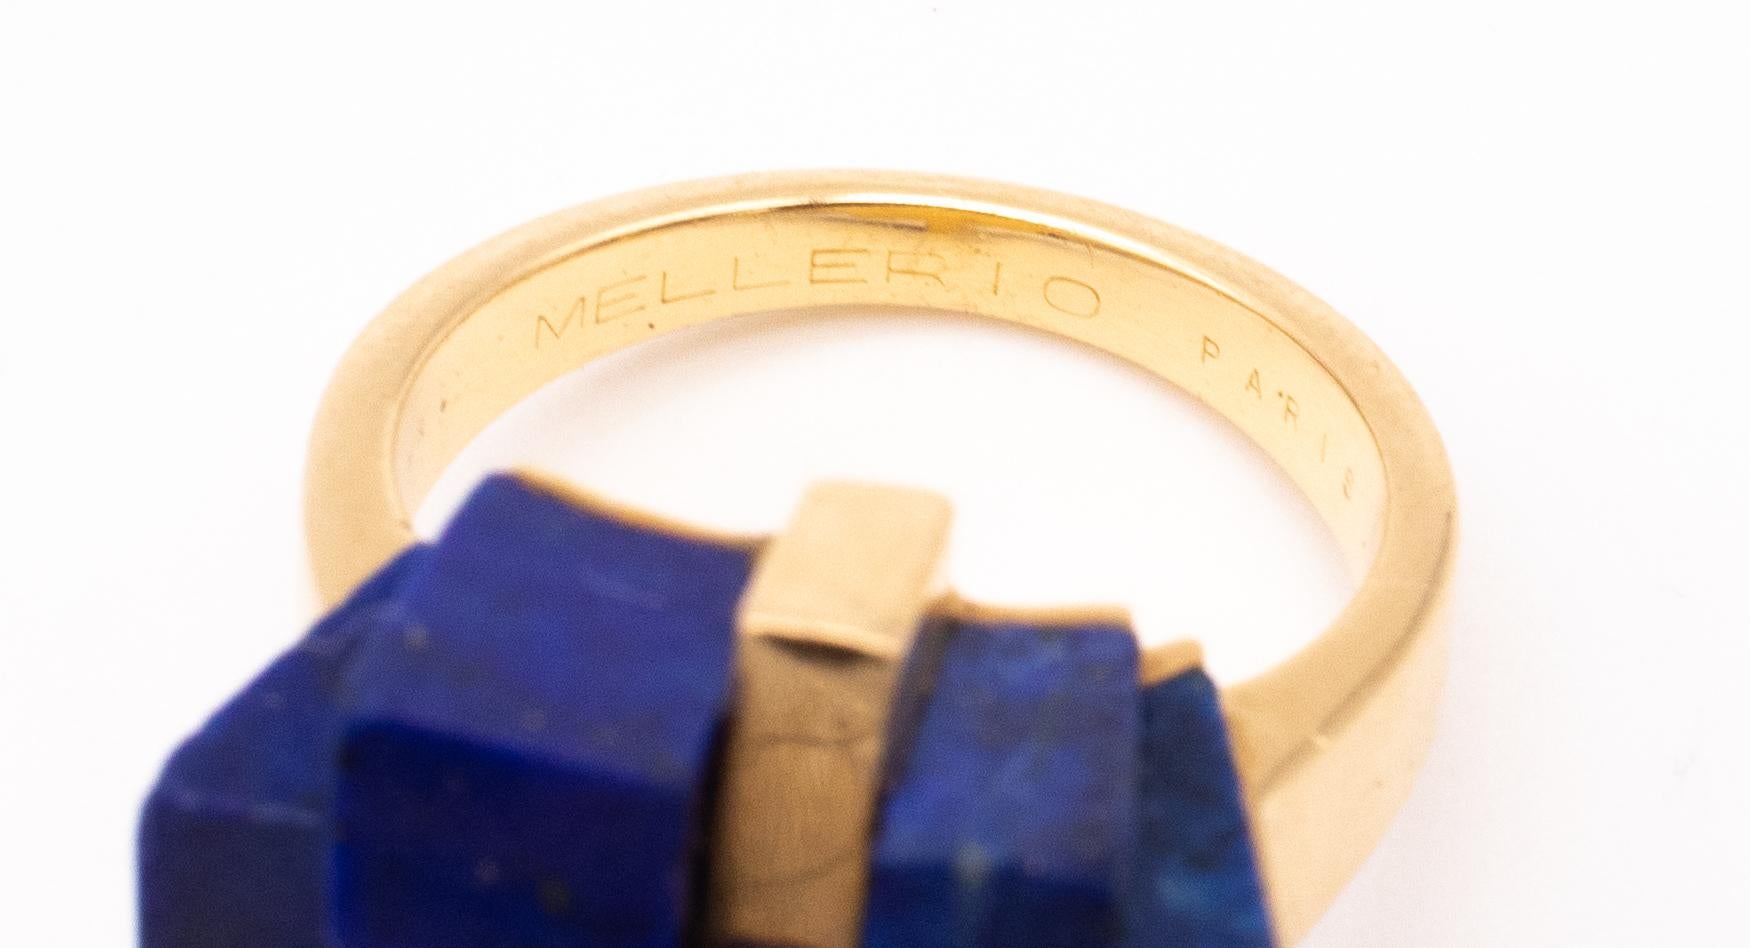 Women's Mellerio 1970 Paris Rare Geometric 18Kt Yellow Gold Ring With Carved Lapis Lazul